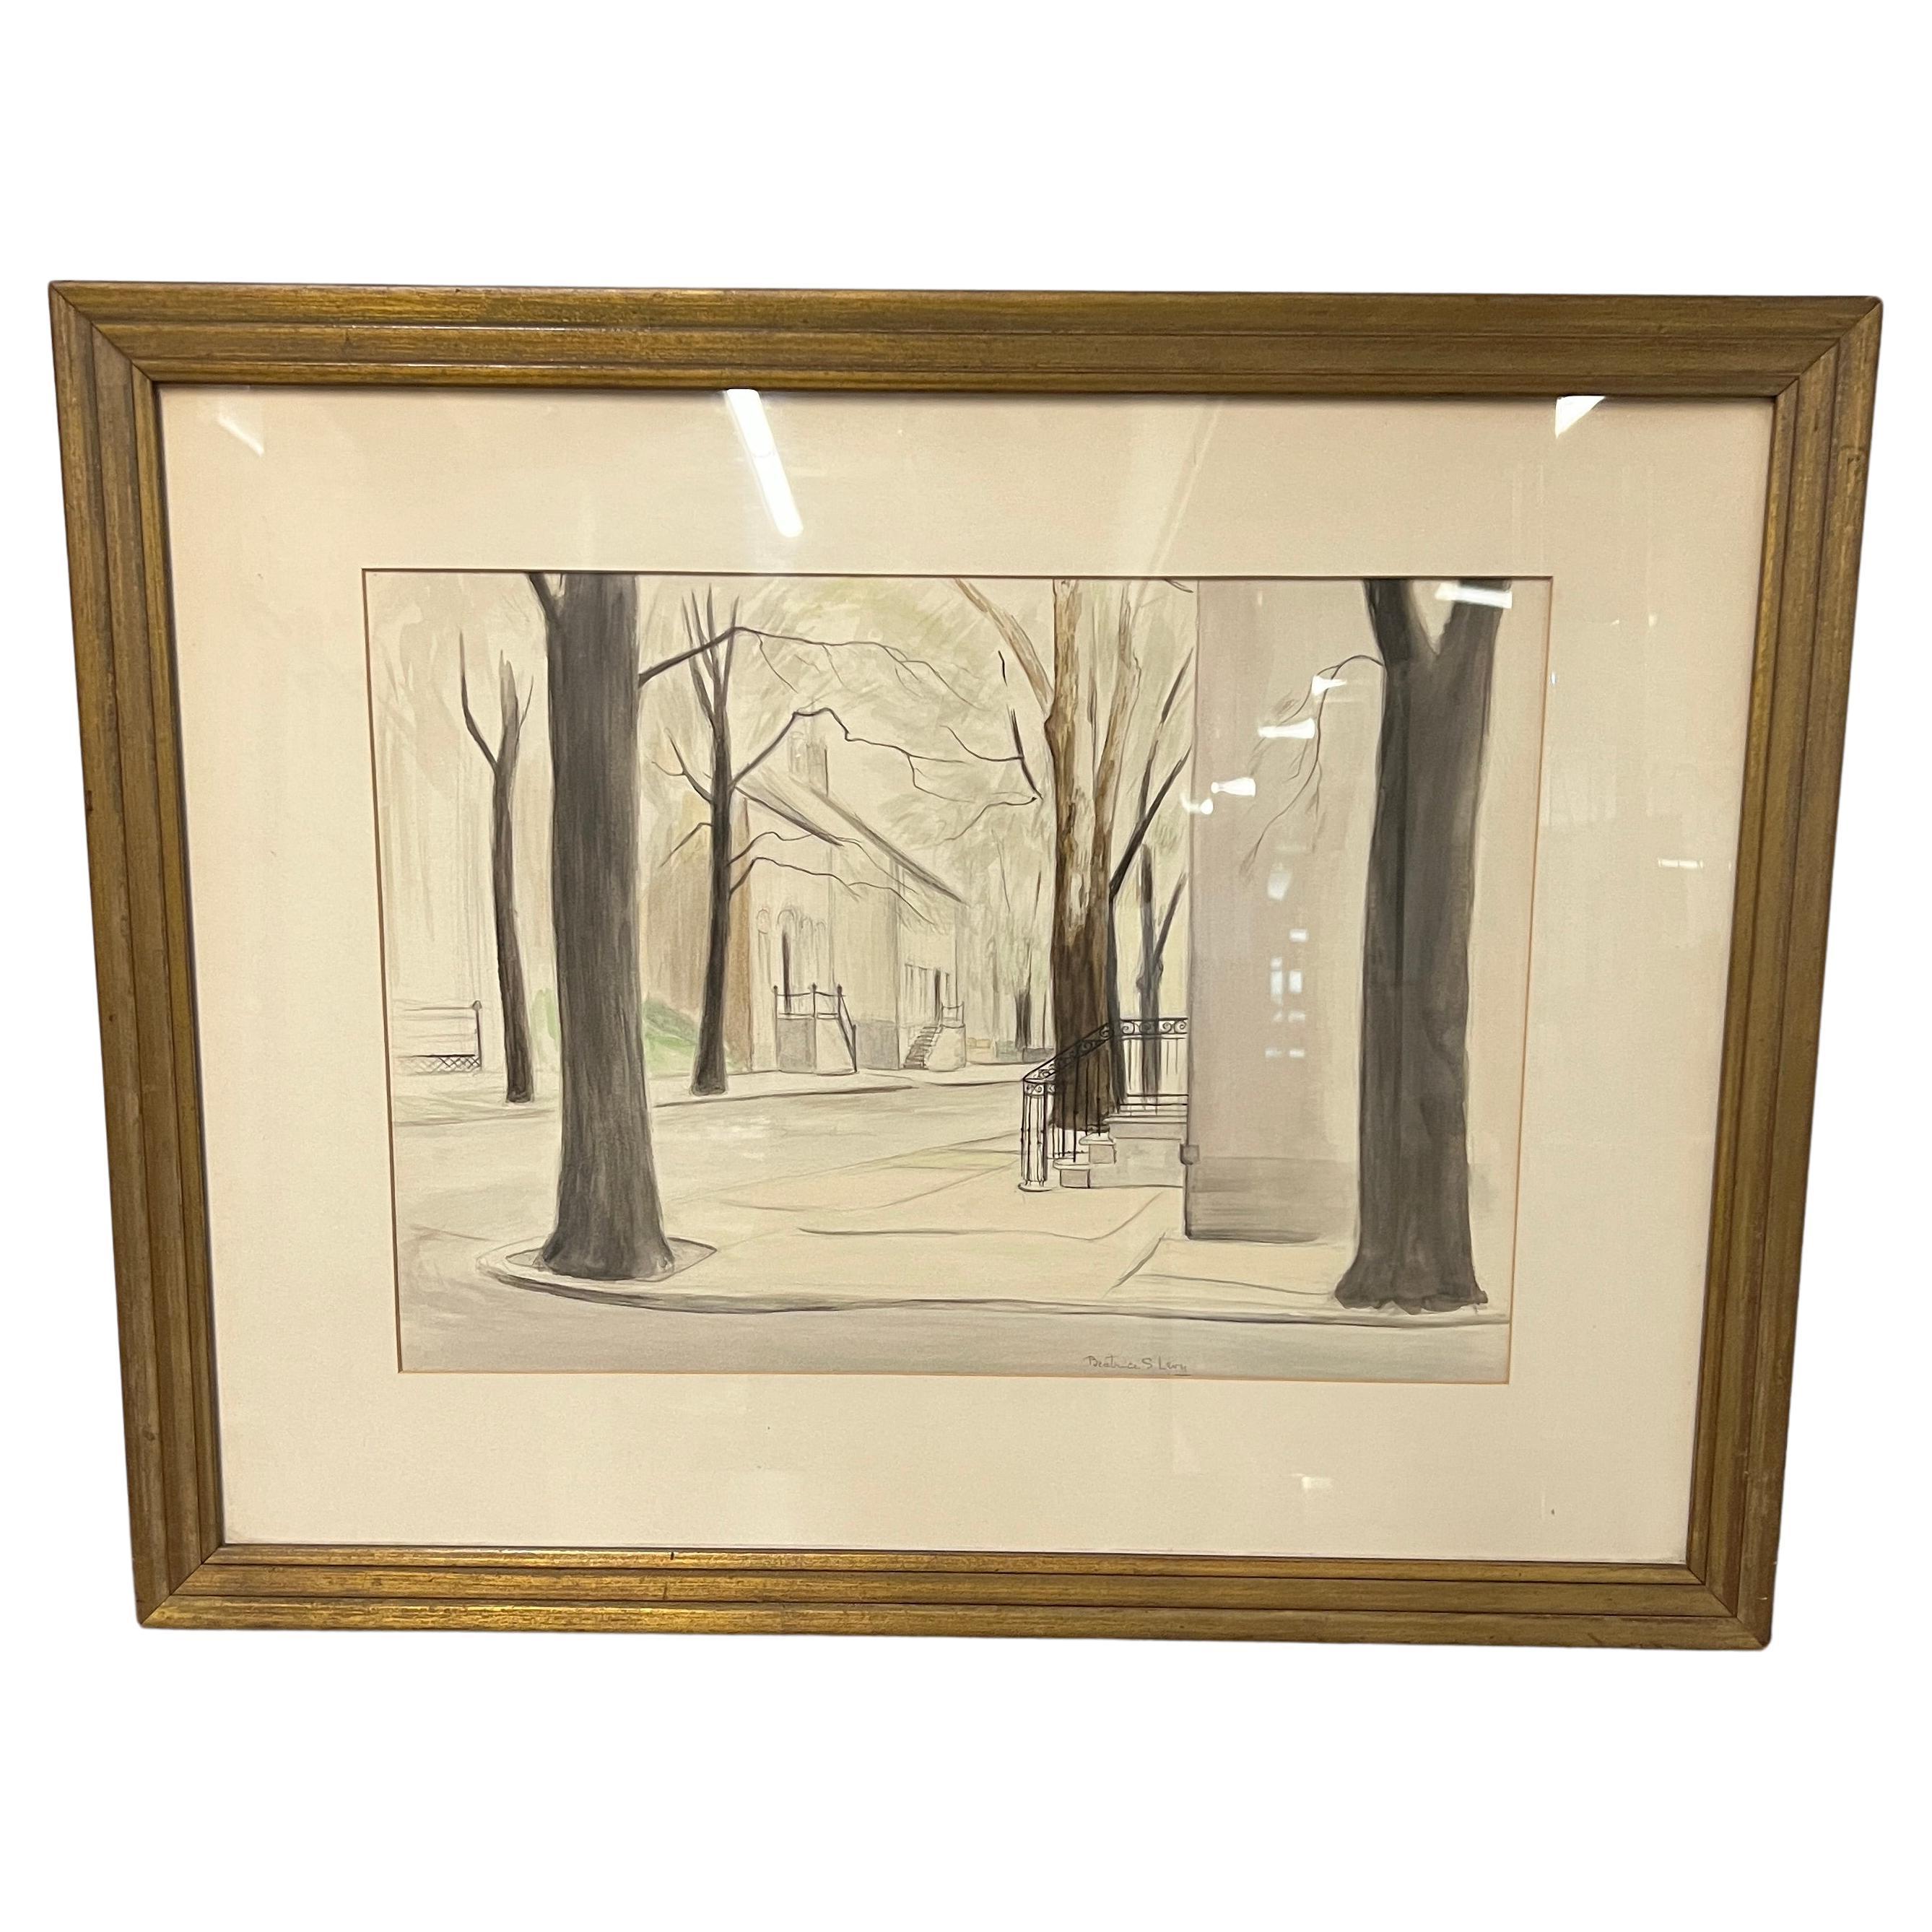 Framed Watercolor Titled "Quiet Street Corner" Madison, in by Beatrice S. Levy For Sale